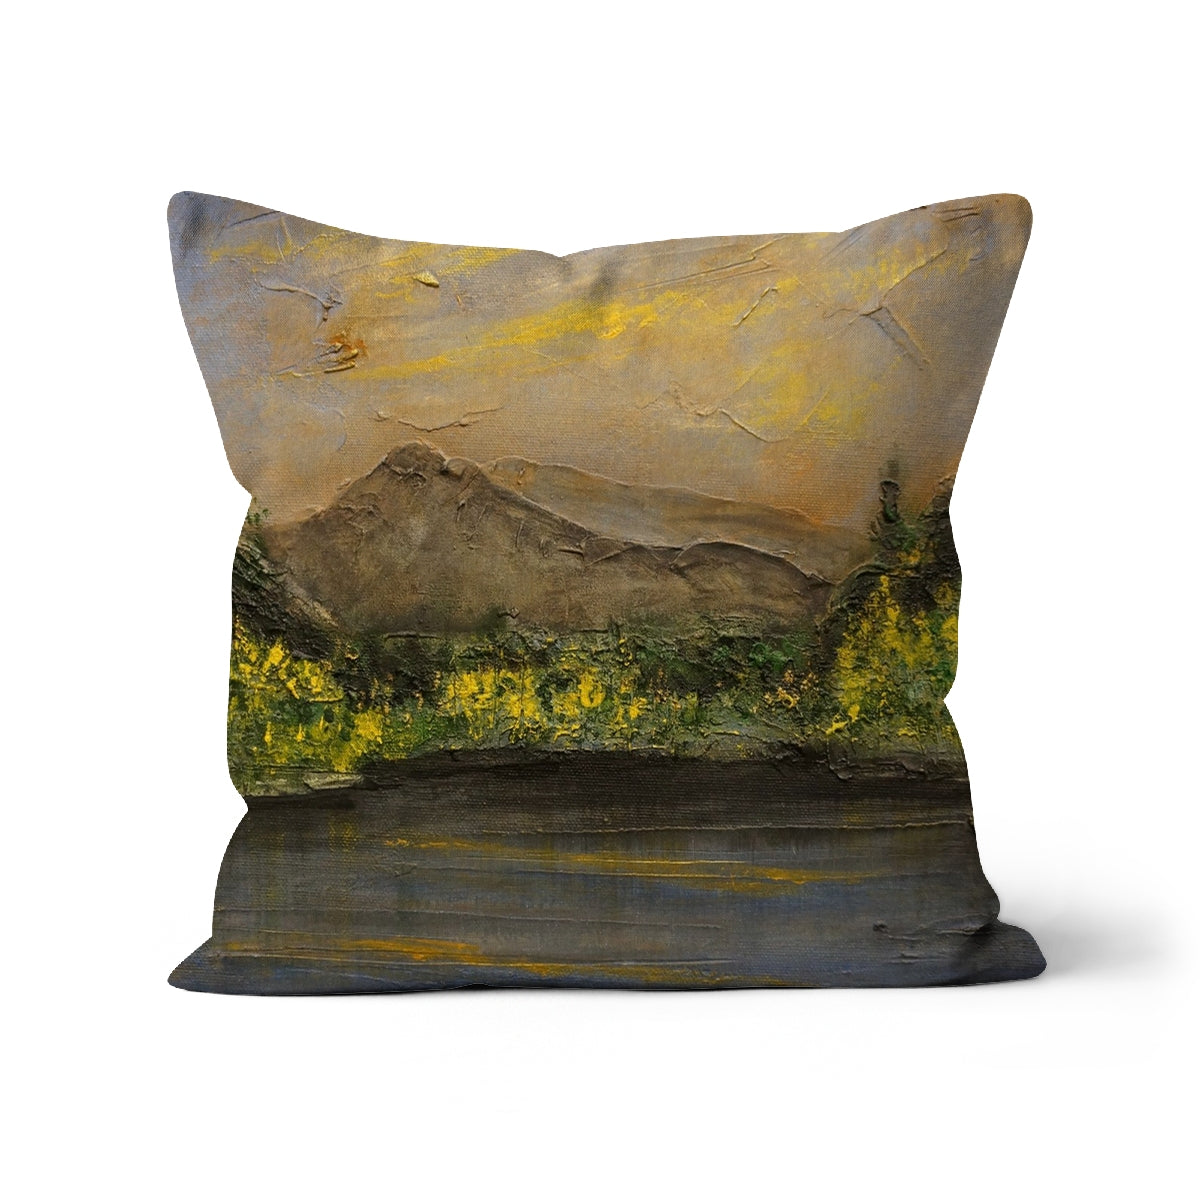 Glencoe Lochan Dusk Art Gifts Cushion-Cushions-Scottish Lochs & Mountains Art Gallery-Faux Suede-22"x22"-Paintings, Prints, Homeware, Art Gifts From Scotland By Scottish Artist Kevin Hunter